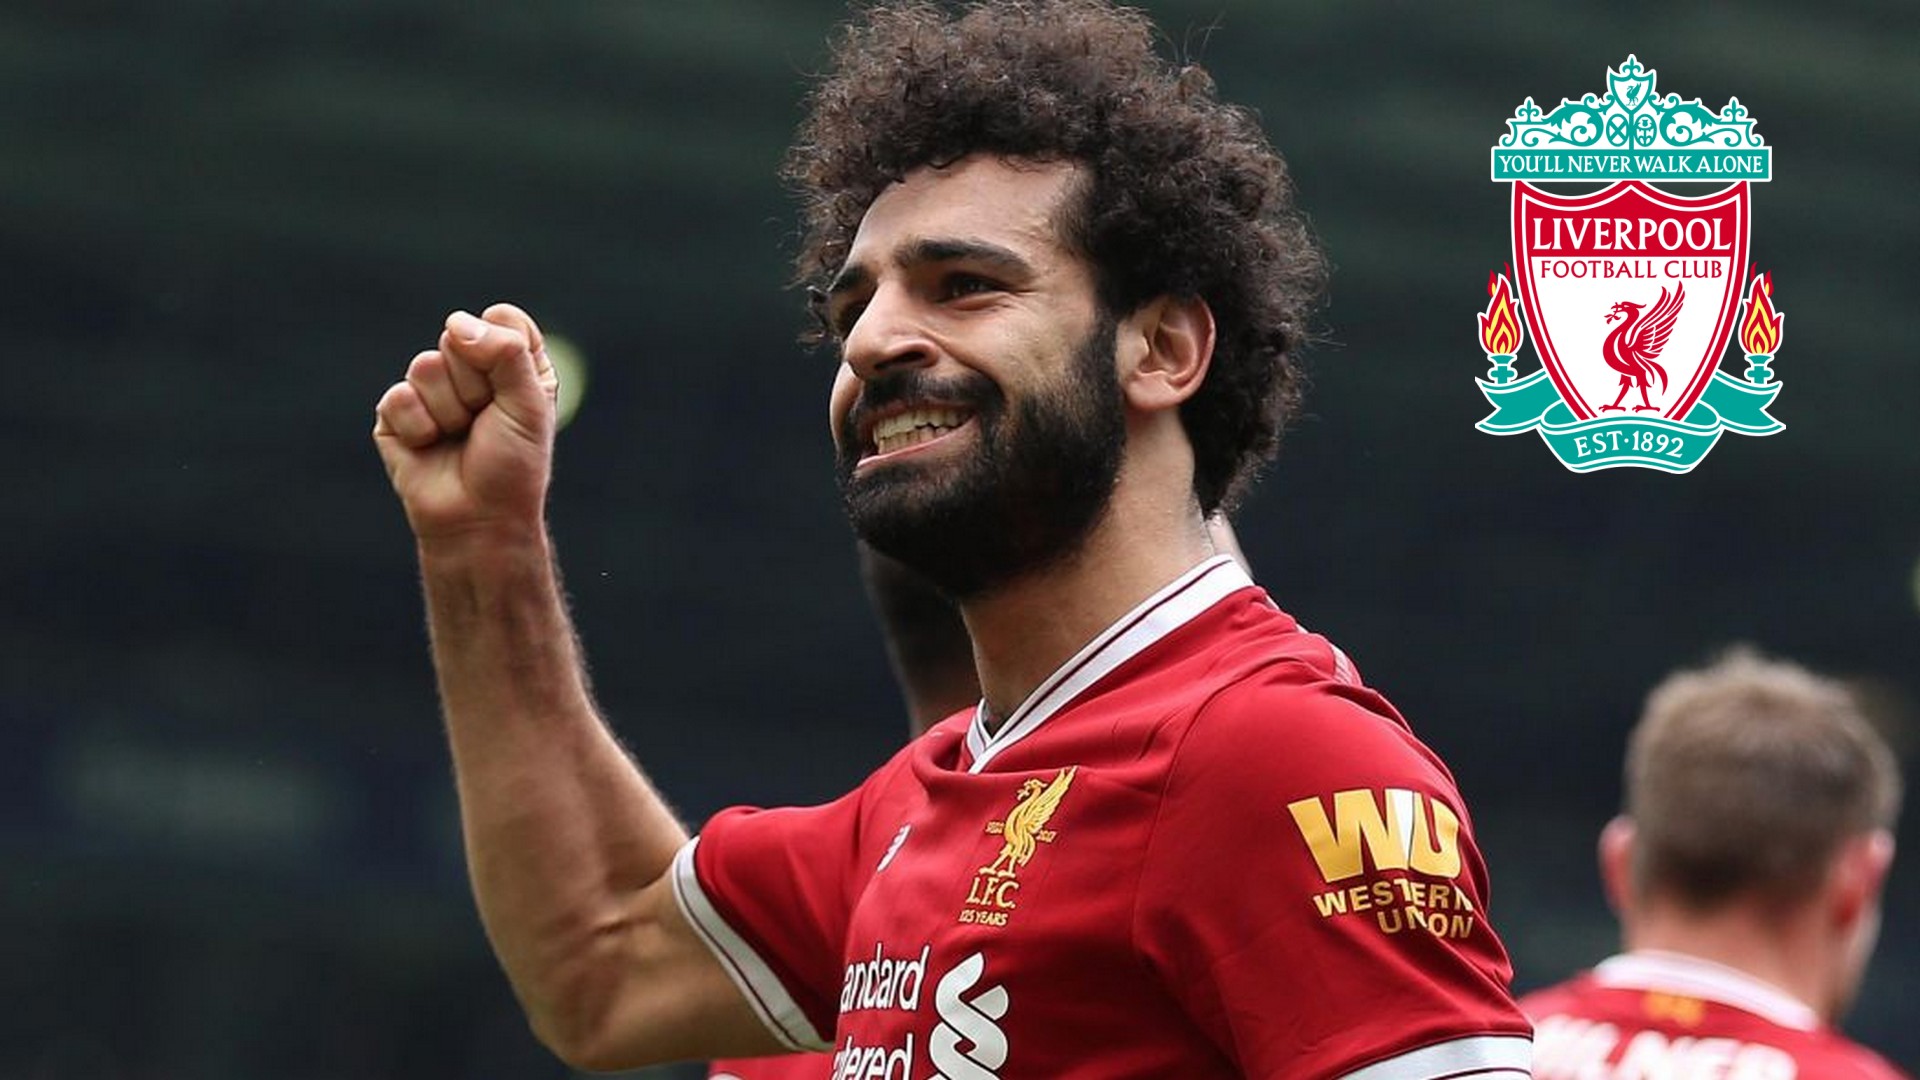 Mohamed Salah Liverpool Desktop Backgrounds With Resolution 1920X1080 pixel. You can make this wallpaper for your Desktop Computer Backgrounds, Mac Wallpapers, Android Lock screen or iPhone Screensavers